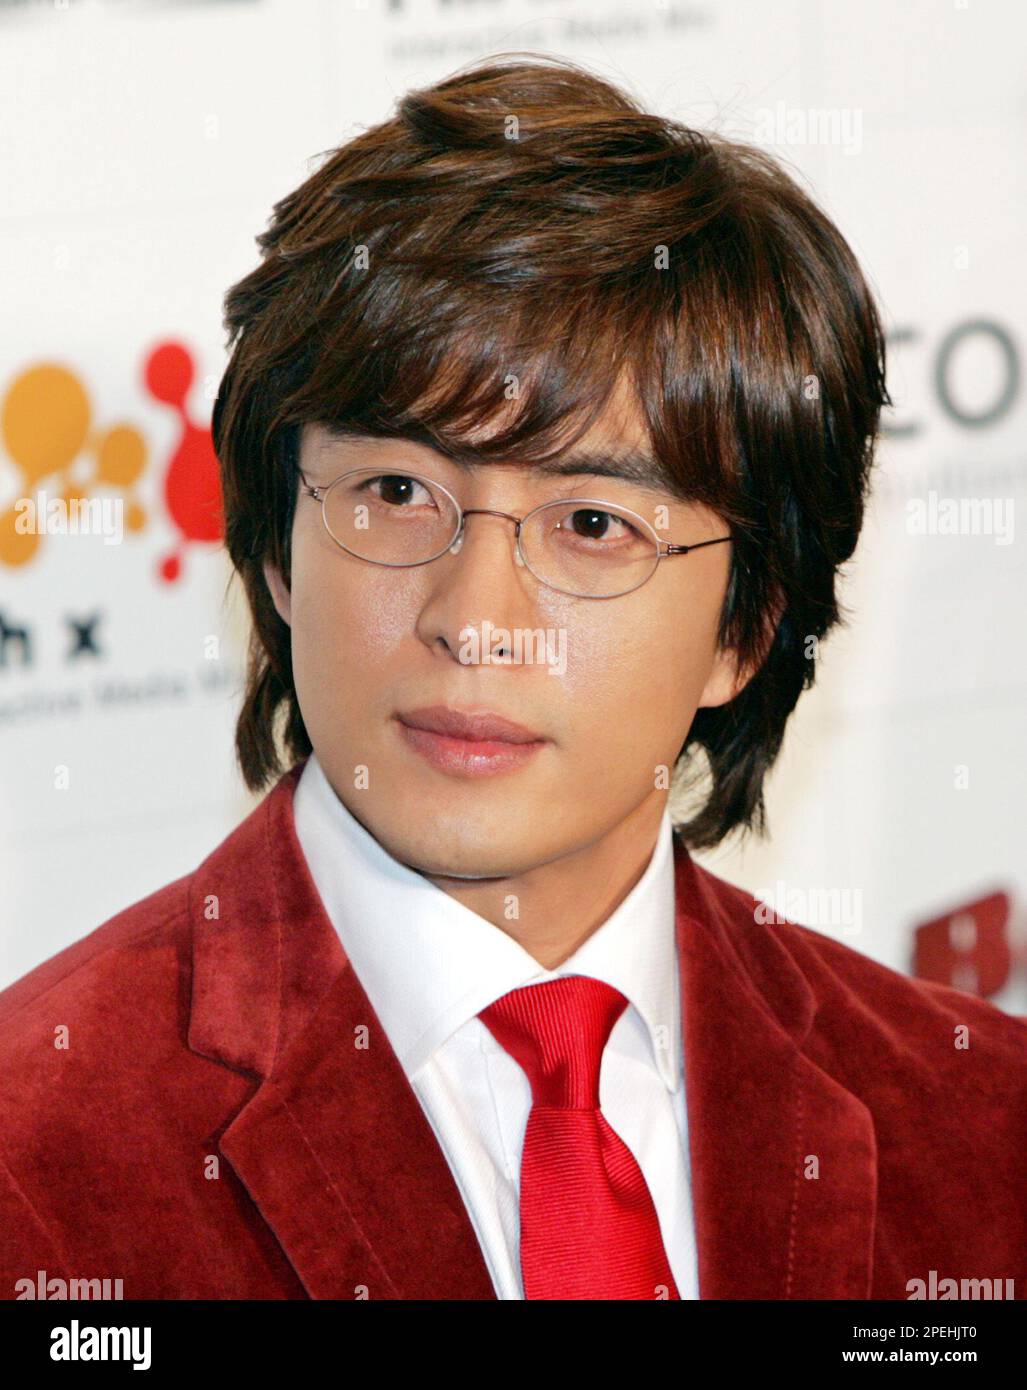 South Korean actor Bae Yong-joon appears before opening his photo exhibition in Tokyo Friday, Nov. 26, 2004. Bae, a main actor of the mega-hit South Korean soap opera "Winter Sonata," apologized to the media and canceled some of his engagements for the day after learning ten of his fans were slightly injured earlier in the day in a jostling incident when his car was leaving a Tokyo hotel. The 32-year-old star arrived in Japan Thursday to attend the opening of the exhibition held in commemoration of the release of his photo collection in Japan. (AP Photo/Katsumi Kasahara) **EDITORIAL USE ONLY,  Stock Photo